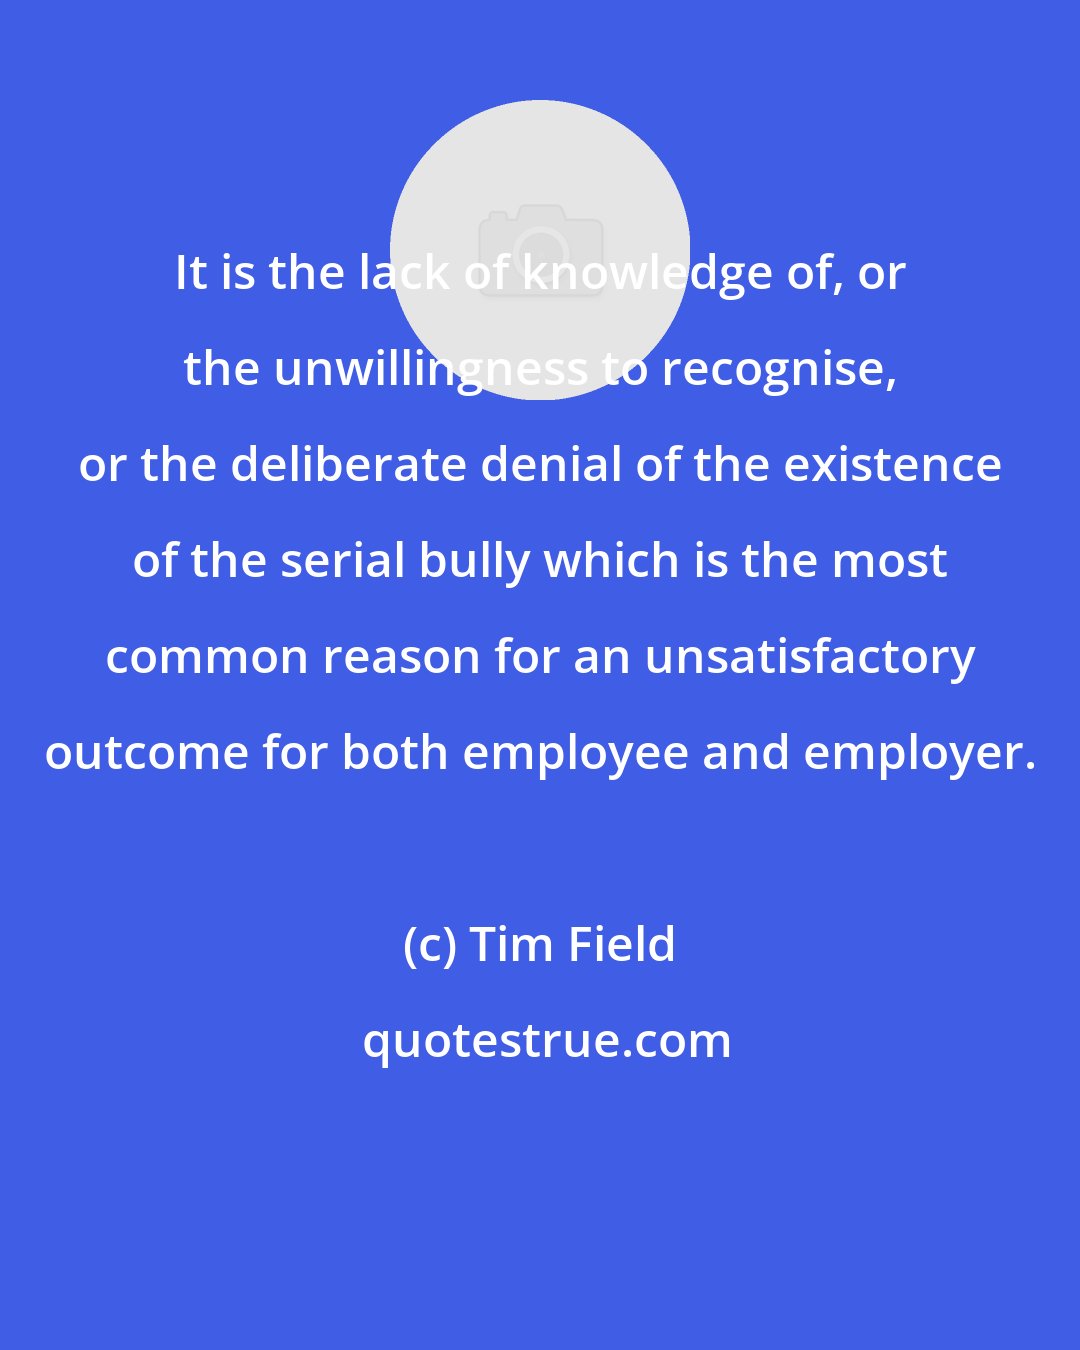 Tim Field: It is the lack of knowledge of, or the unwillingness to recognise, or the deliberate denial of the existence of the serial bully which is the most common reason for an unsatisfactory outcome for both employee and employer.